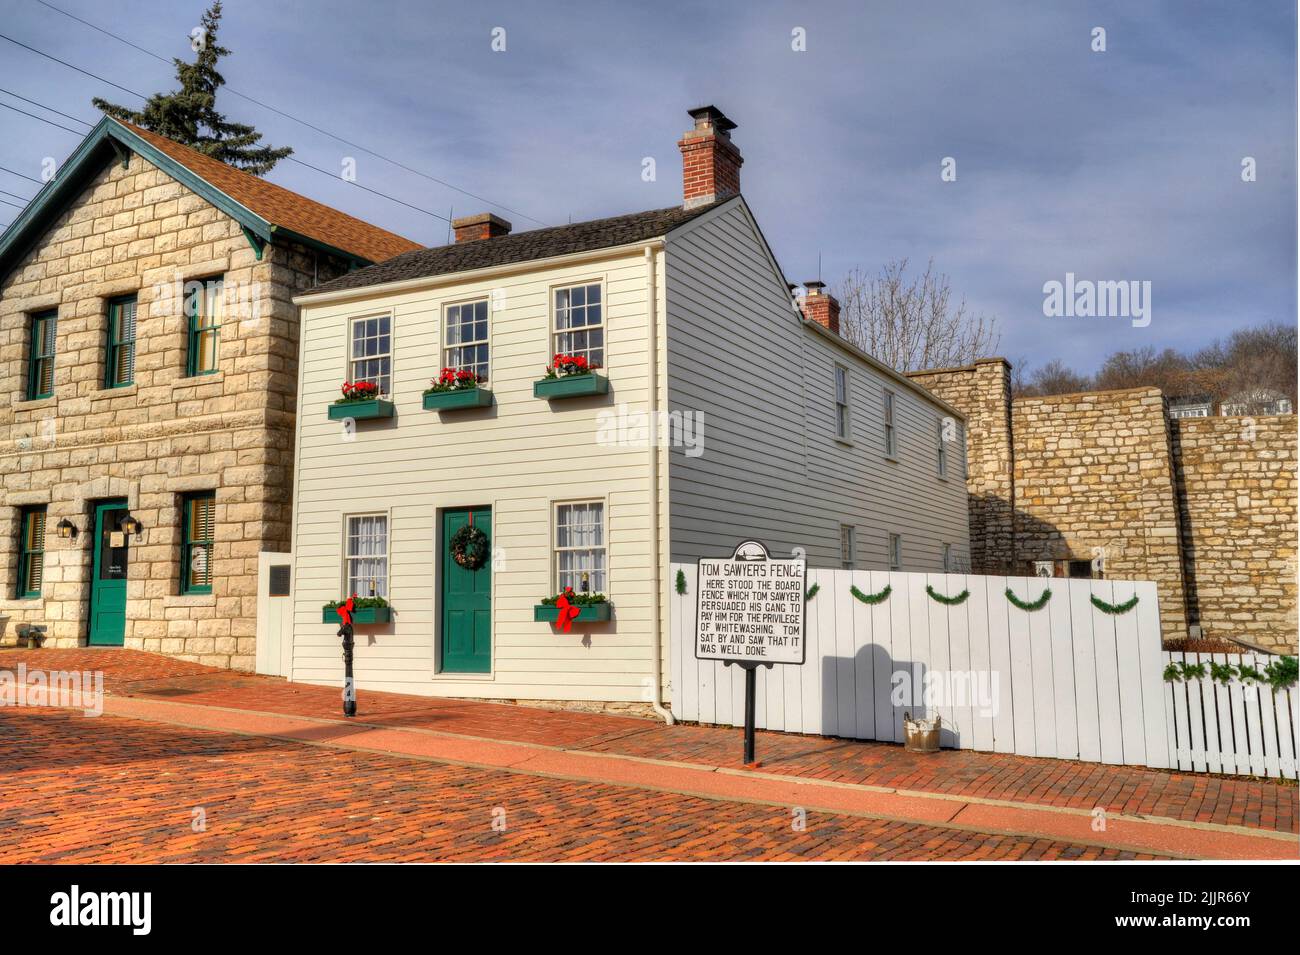 The whitewashed fence of Tom Sawyer fame in historic Hannibal, Missouri Stock Photo